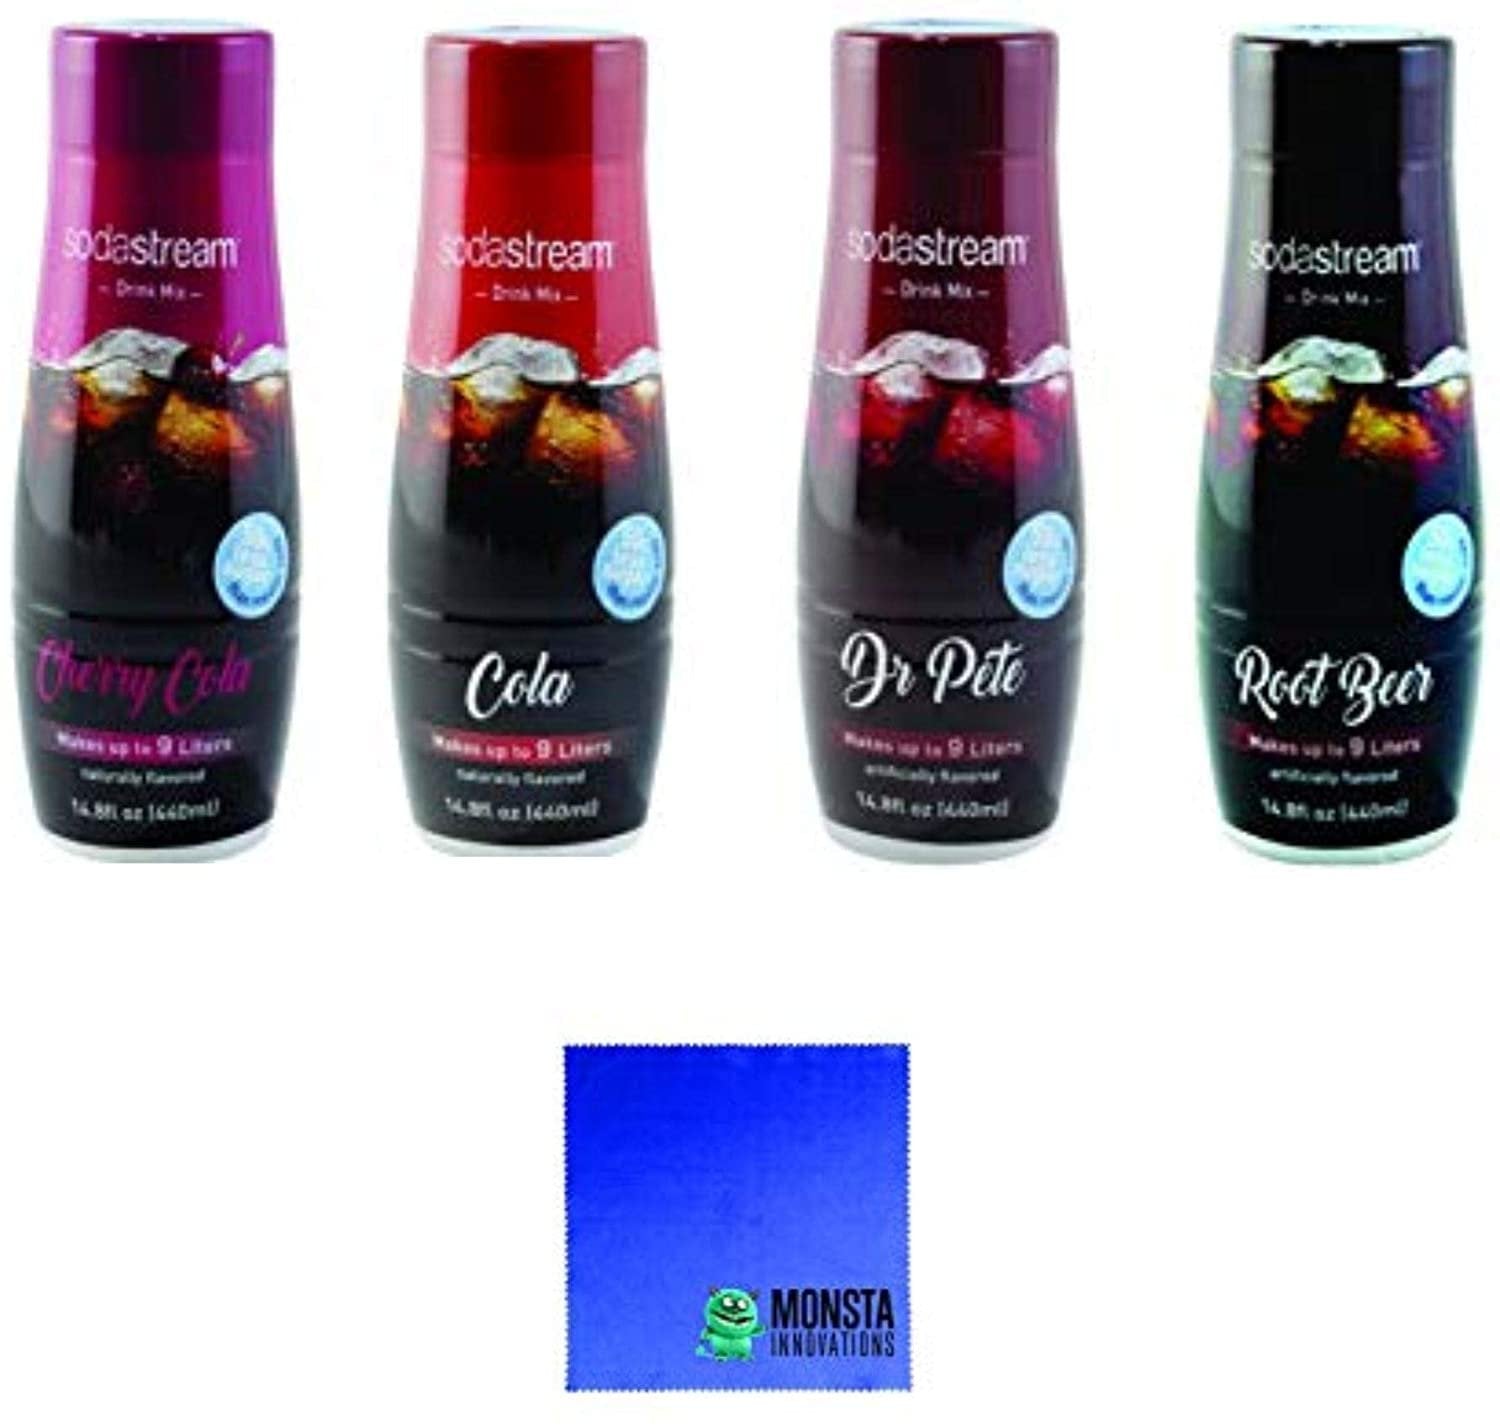 SodaStream 14.8 fl Ounce - Variety Pack - Cherry Cola, Root Beer, Cola, Dr Pete